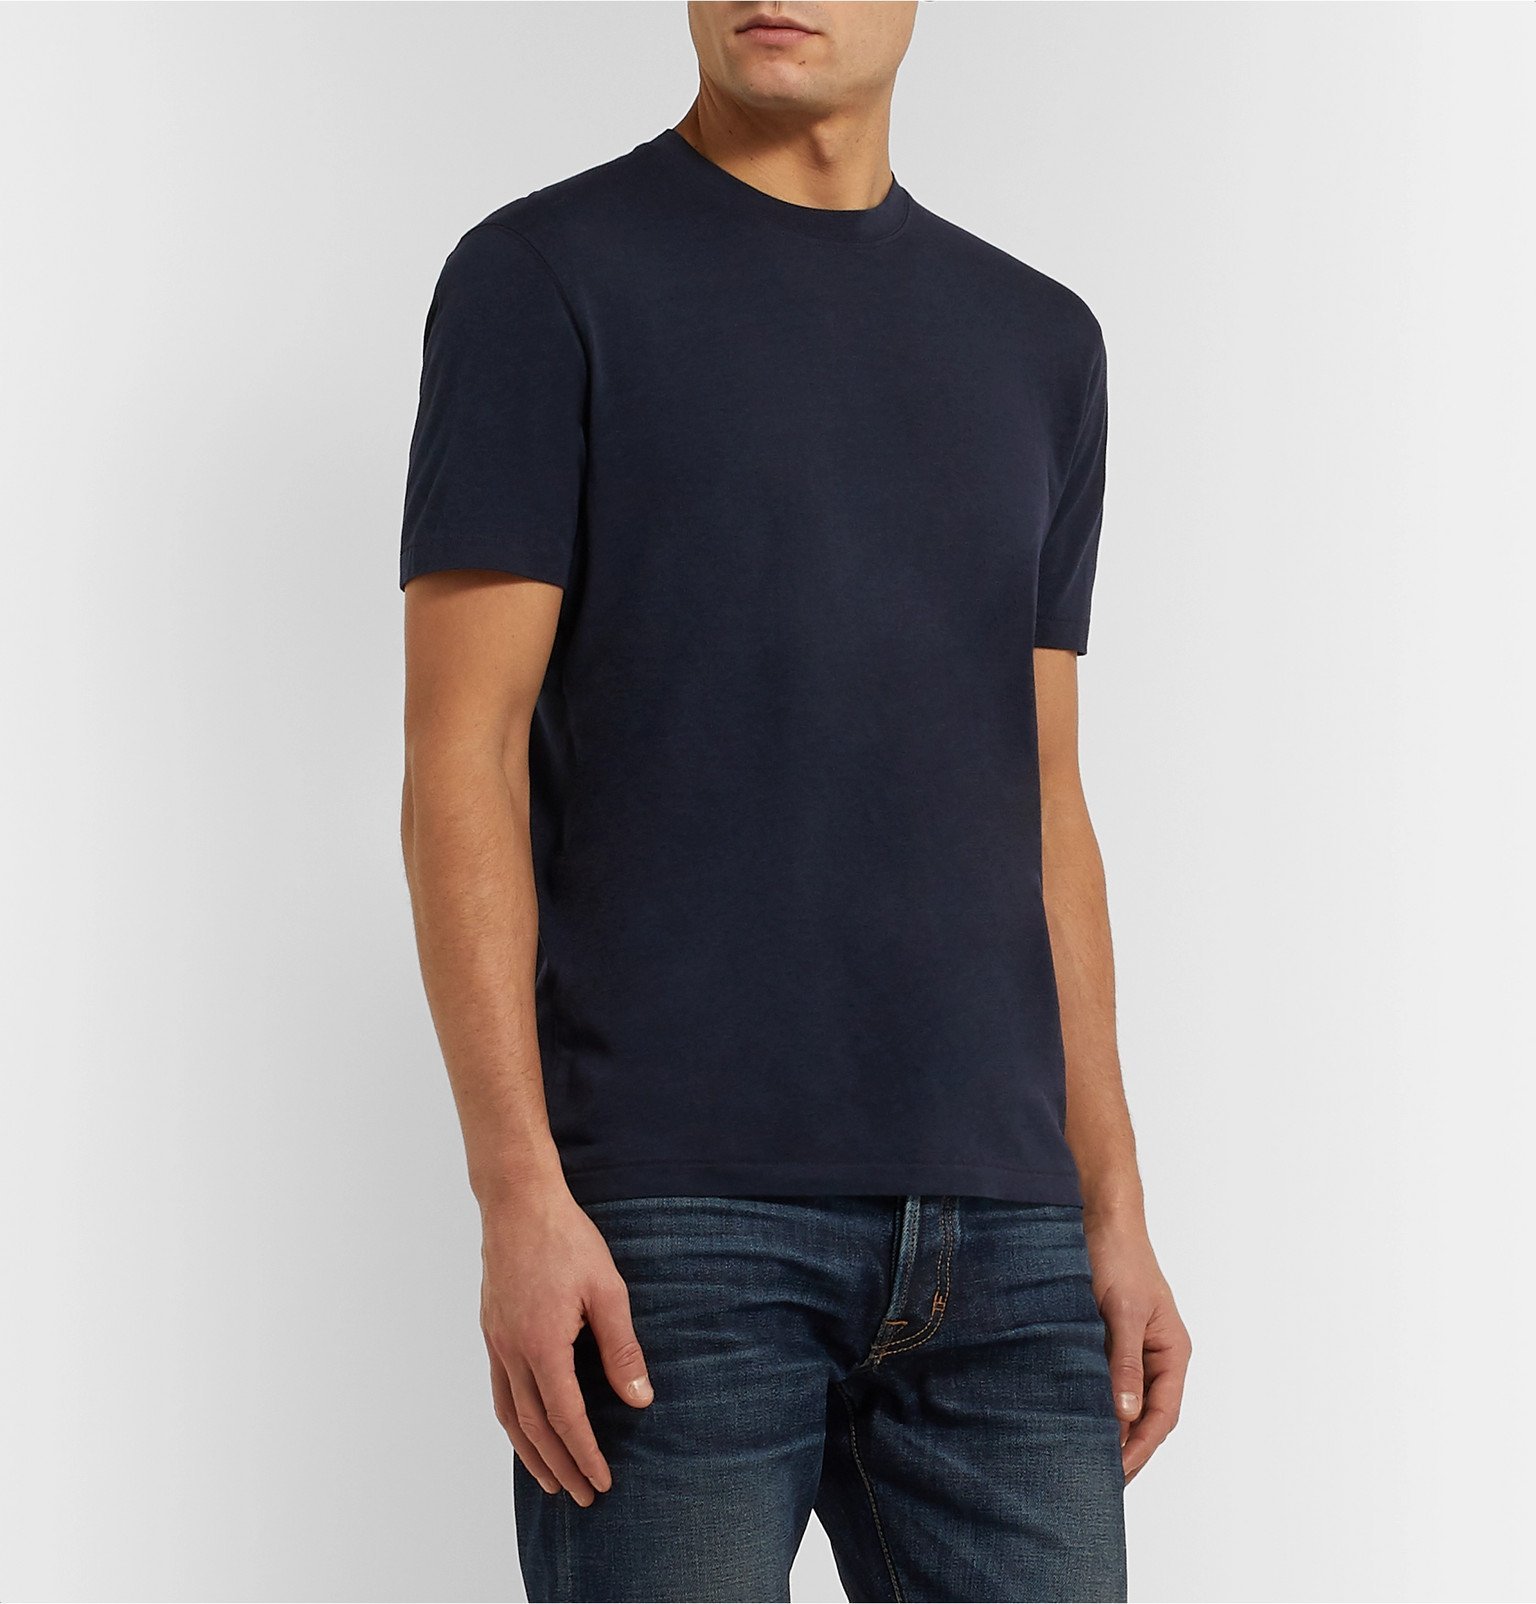 TOM FORD - Slim-Fit Lyocell and Cotton-Blend Jersey T-Shirt - Blue TOM FORD